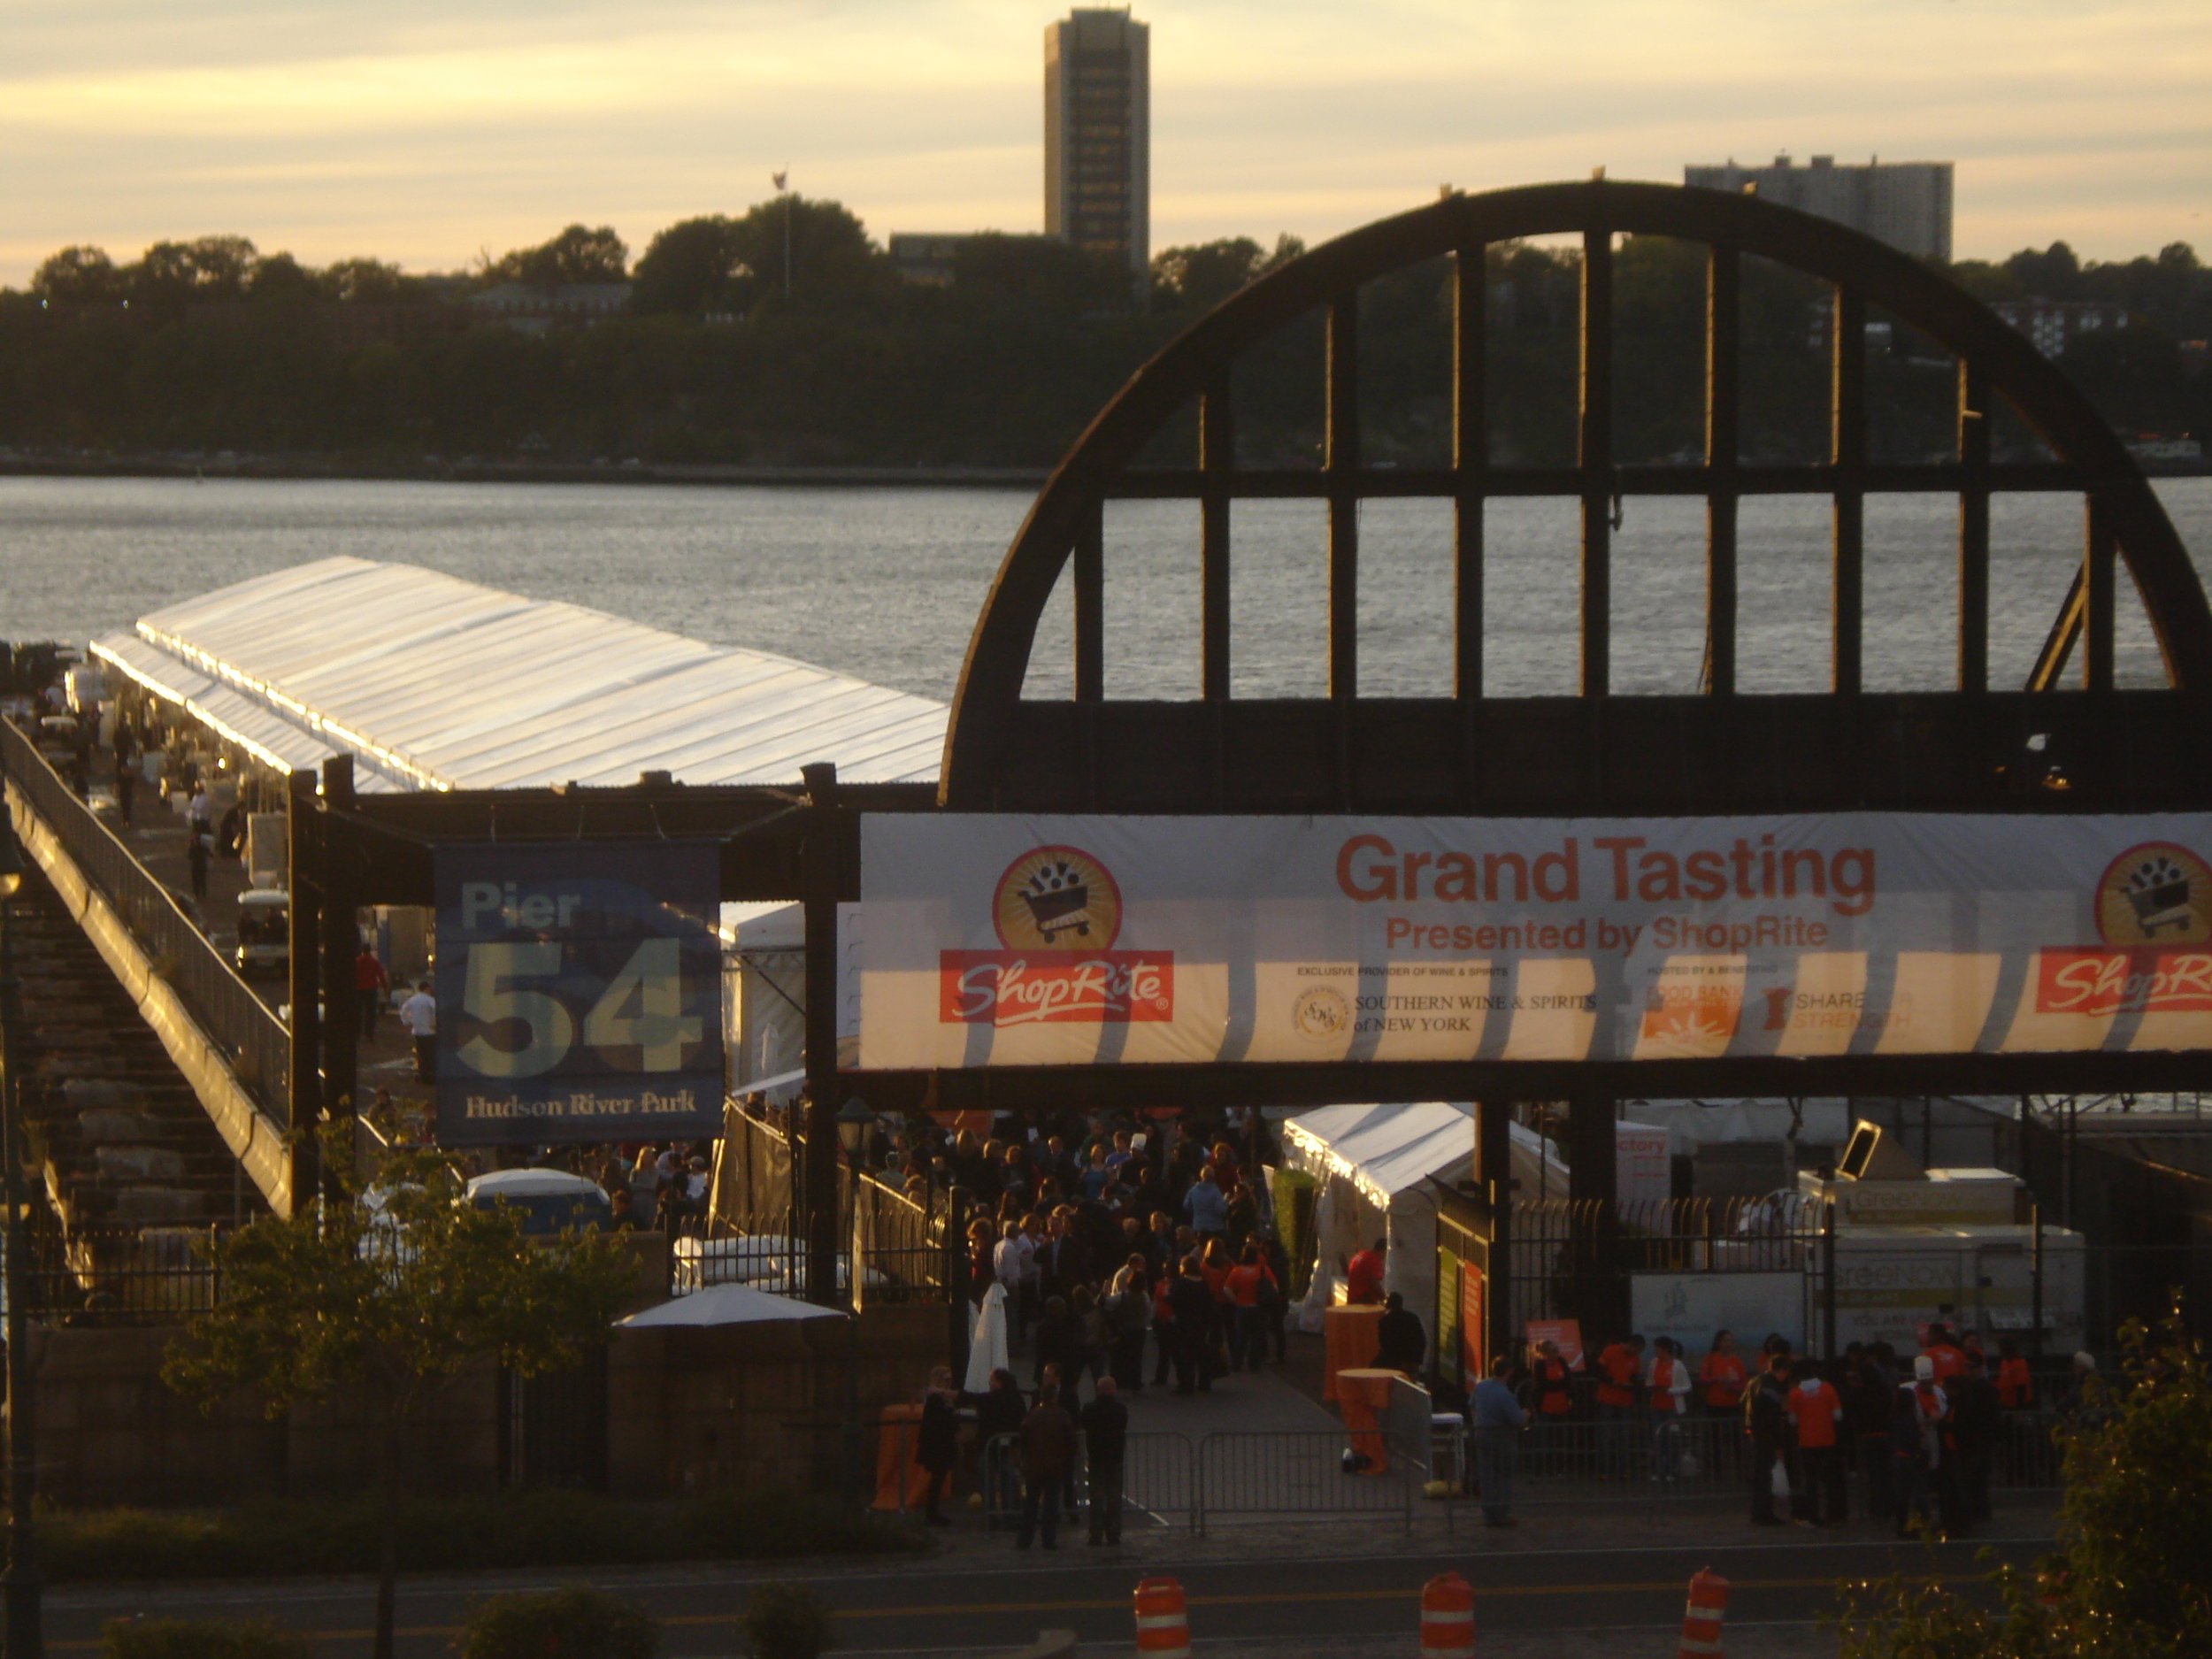 The Grand Tasting tent on the Chelsea Pier seemed to stretch all the way to Jersey.